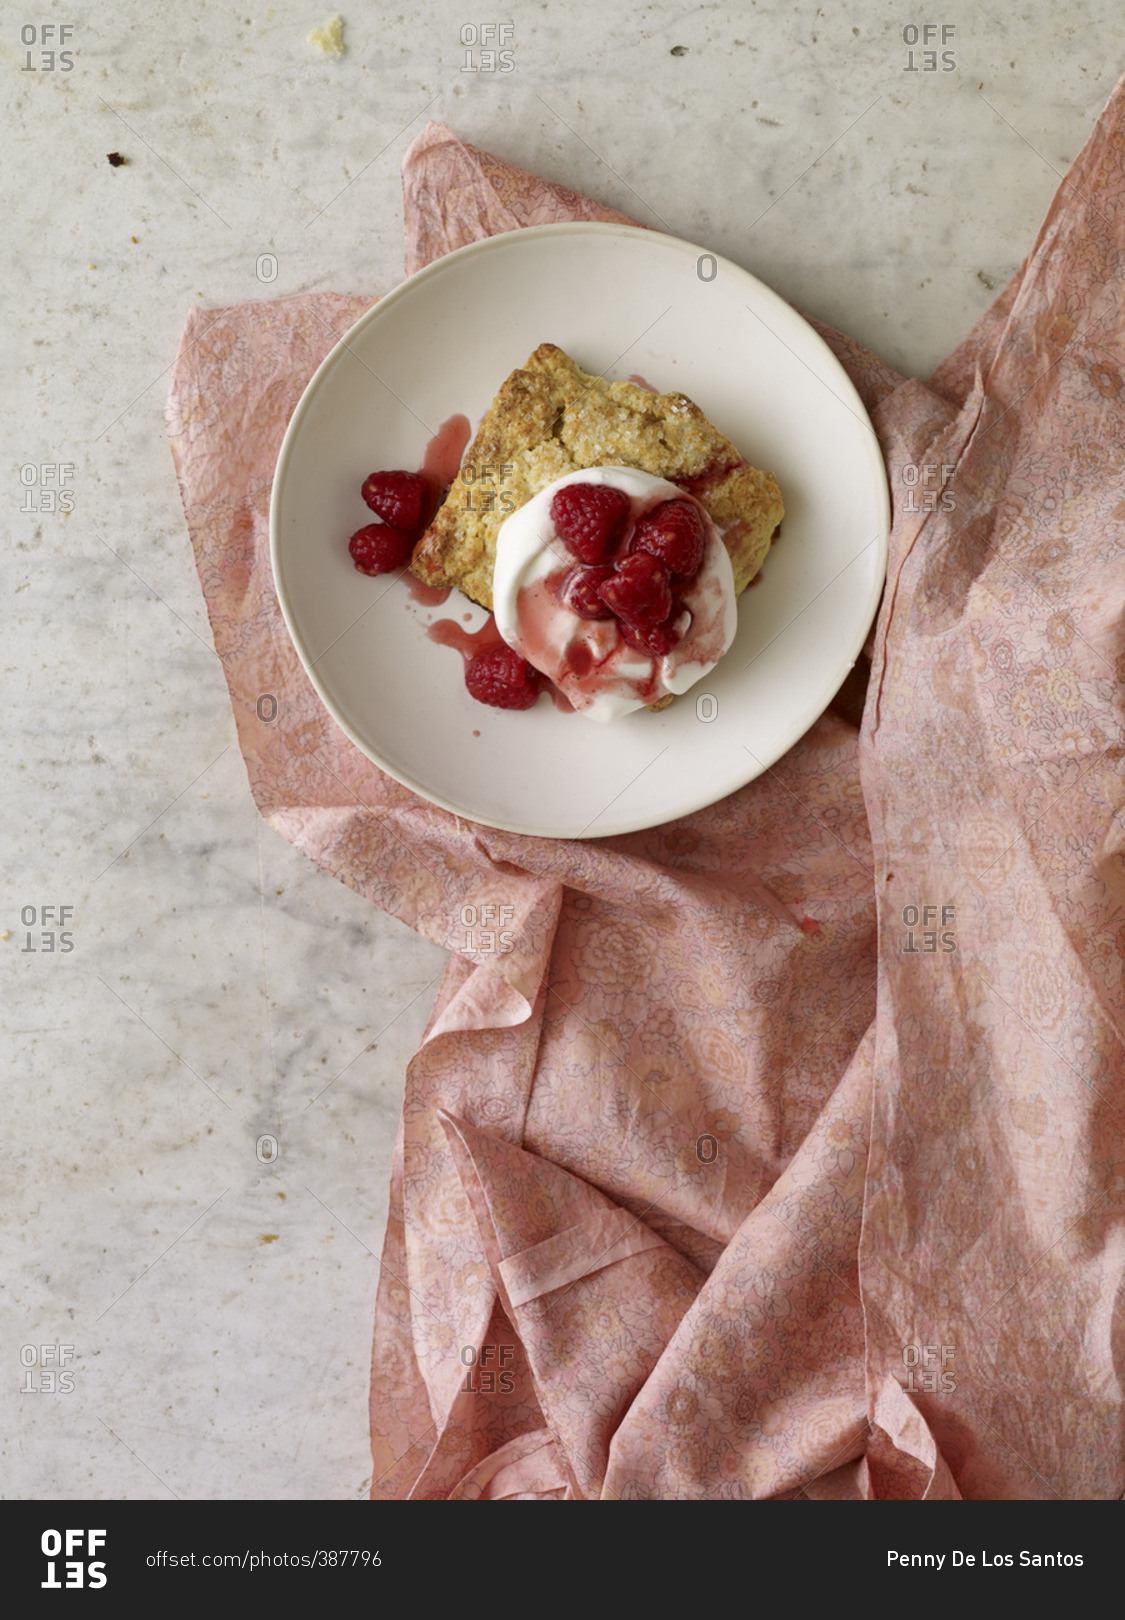 Strawberry shortcake on a plate and a pink floral cloth